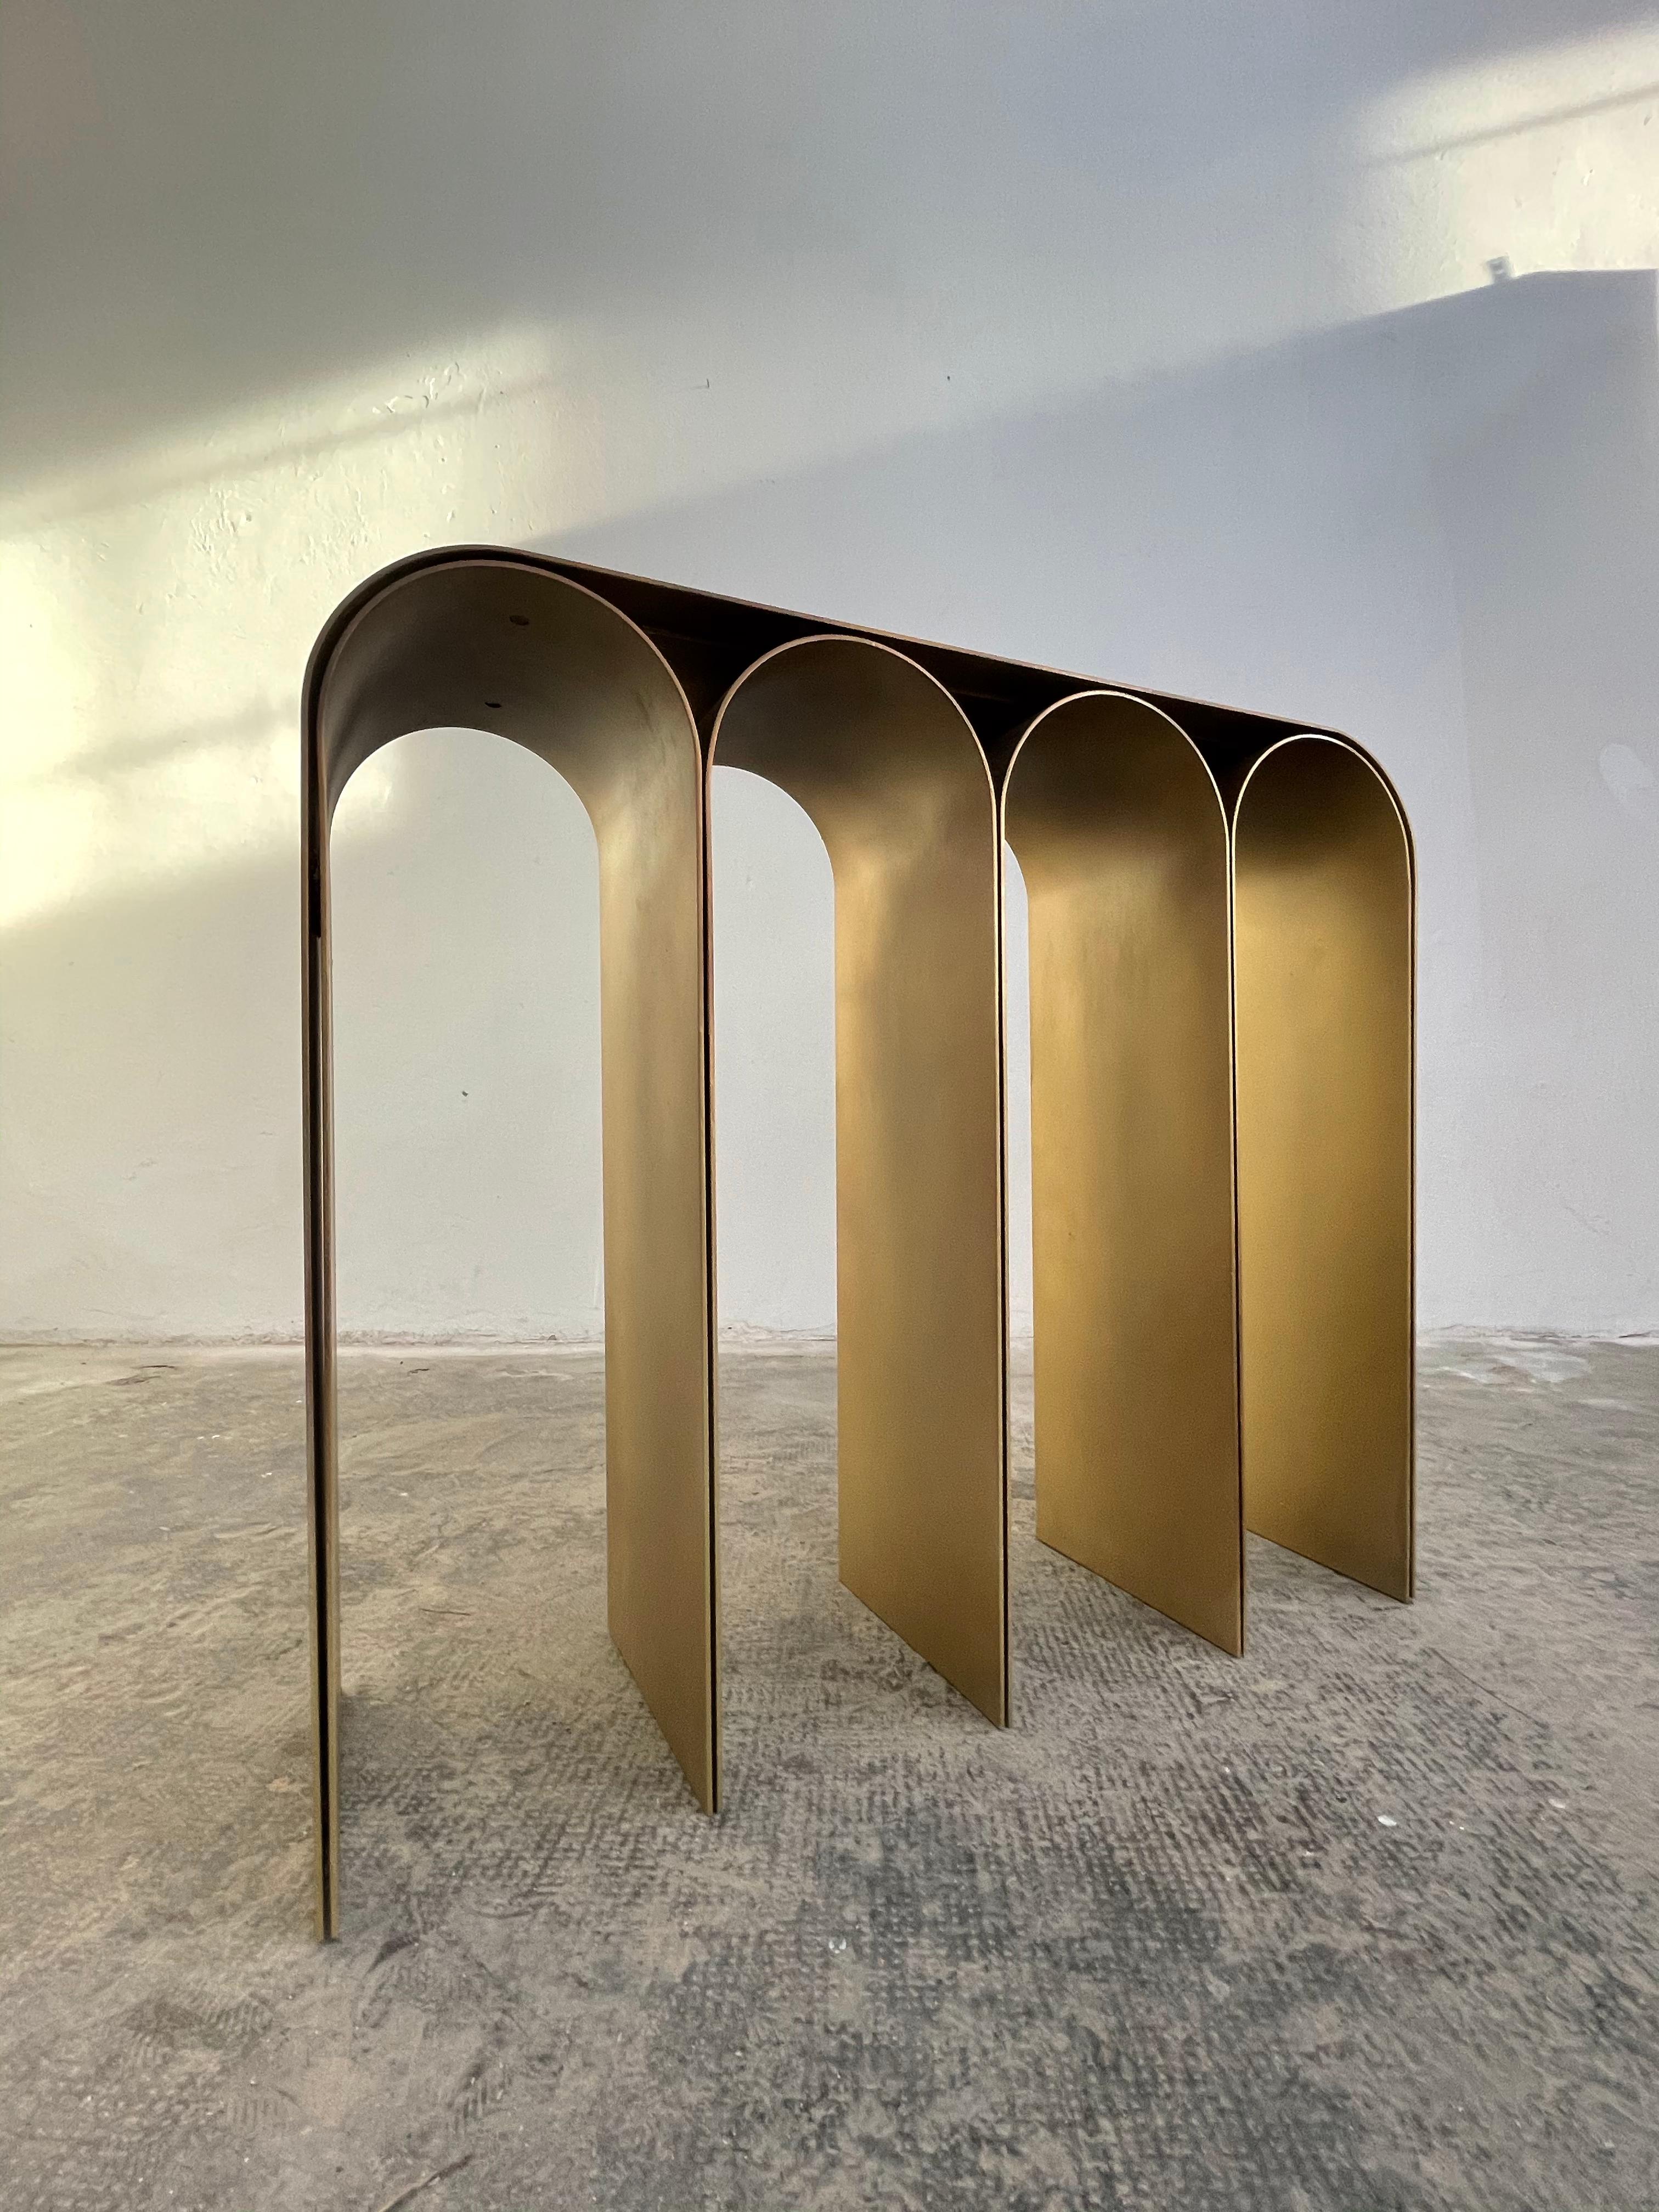 Gold arch console by Pietro Franceschini
Sold exclusively by Galerie Philia
Manufacturer: Prinzivalli
Dimensions: W 103 x L 30 x H 86 cm
Materials: Brass (satin, blackened)
Other finishes: Satin, blackened, polished mirror.

Available